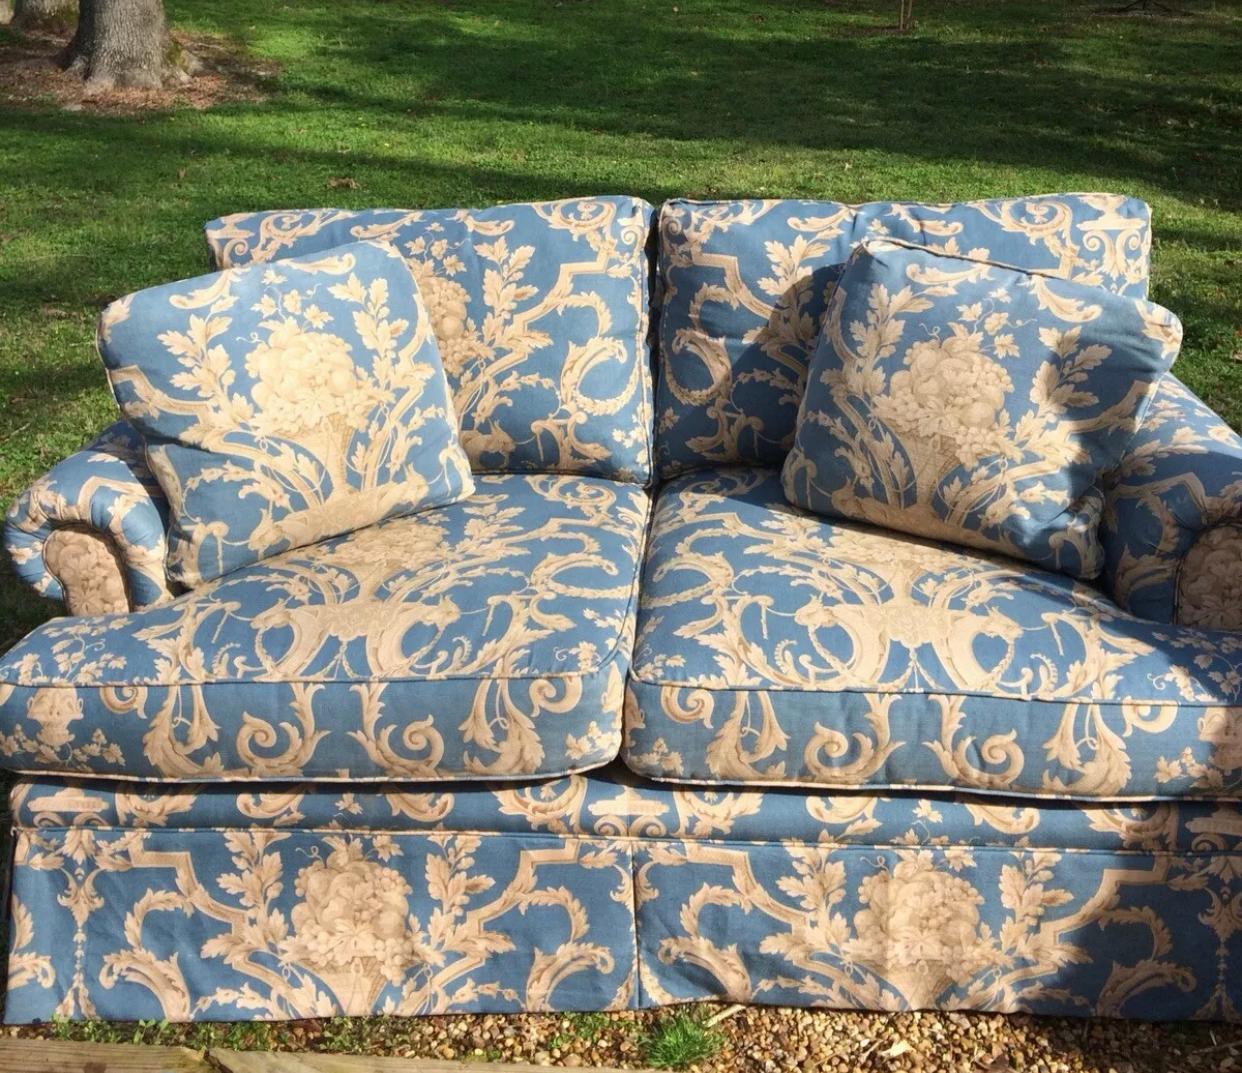 Gorgeous sky blue linen with sand colored pattern 2-seat sofa by Baker Furniture with accent pillows and skirt. Hardwood frame, 8 way handtied quality construction sofa. Wonderful vintage condition